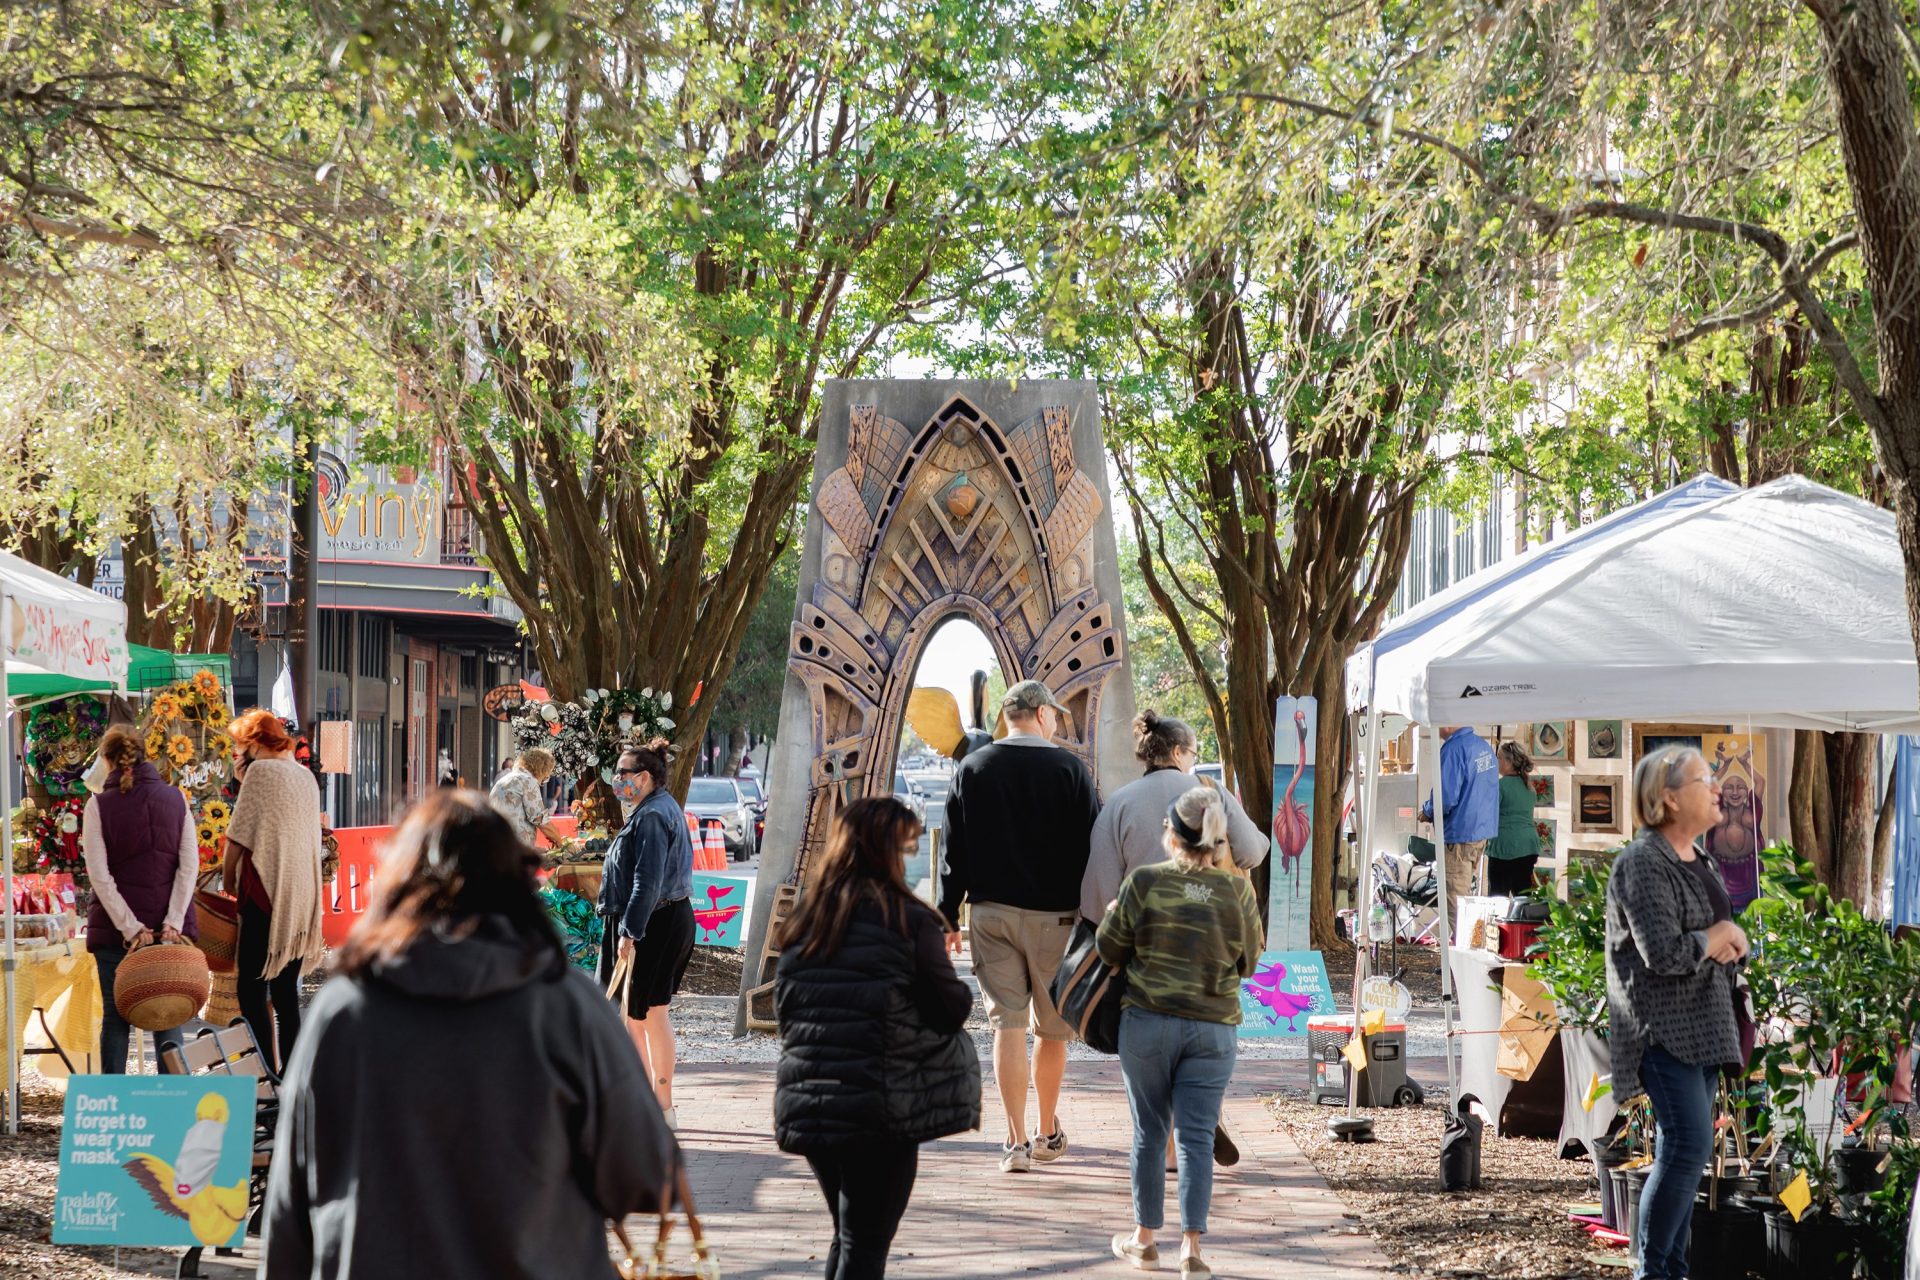 A Guide To the Pensacola Farmers Market On Palafox Street